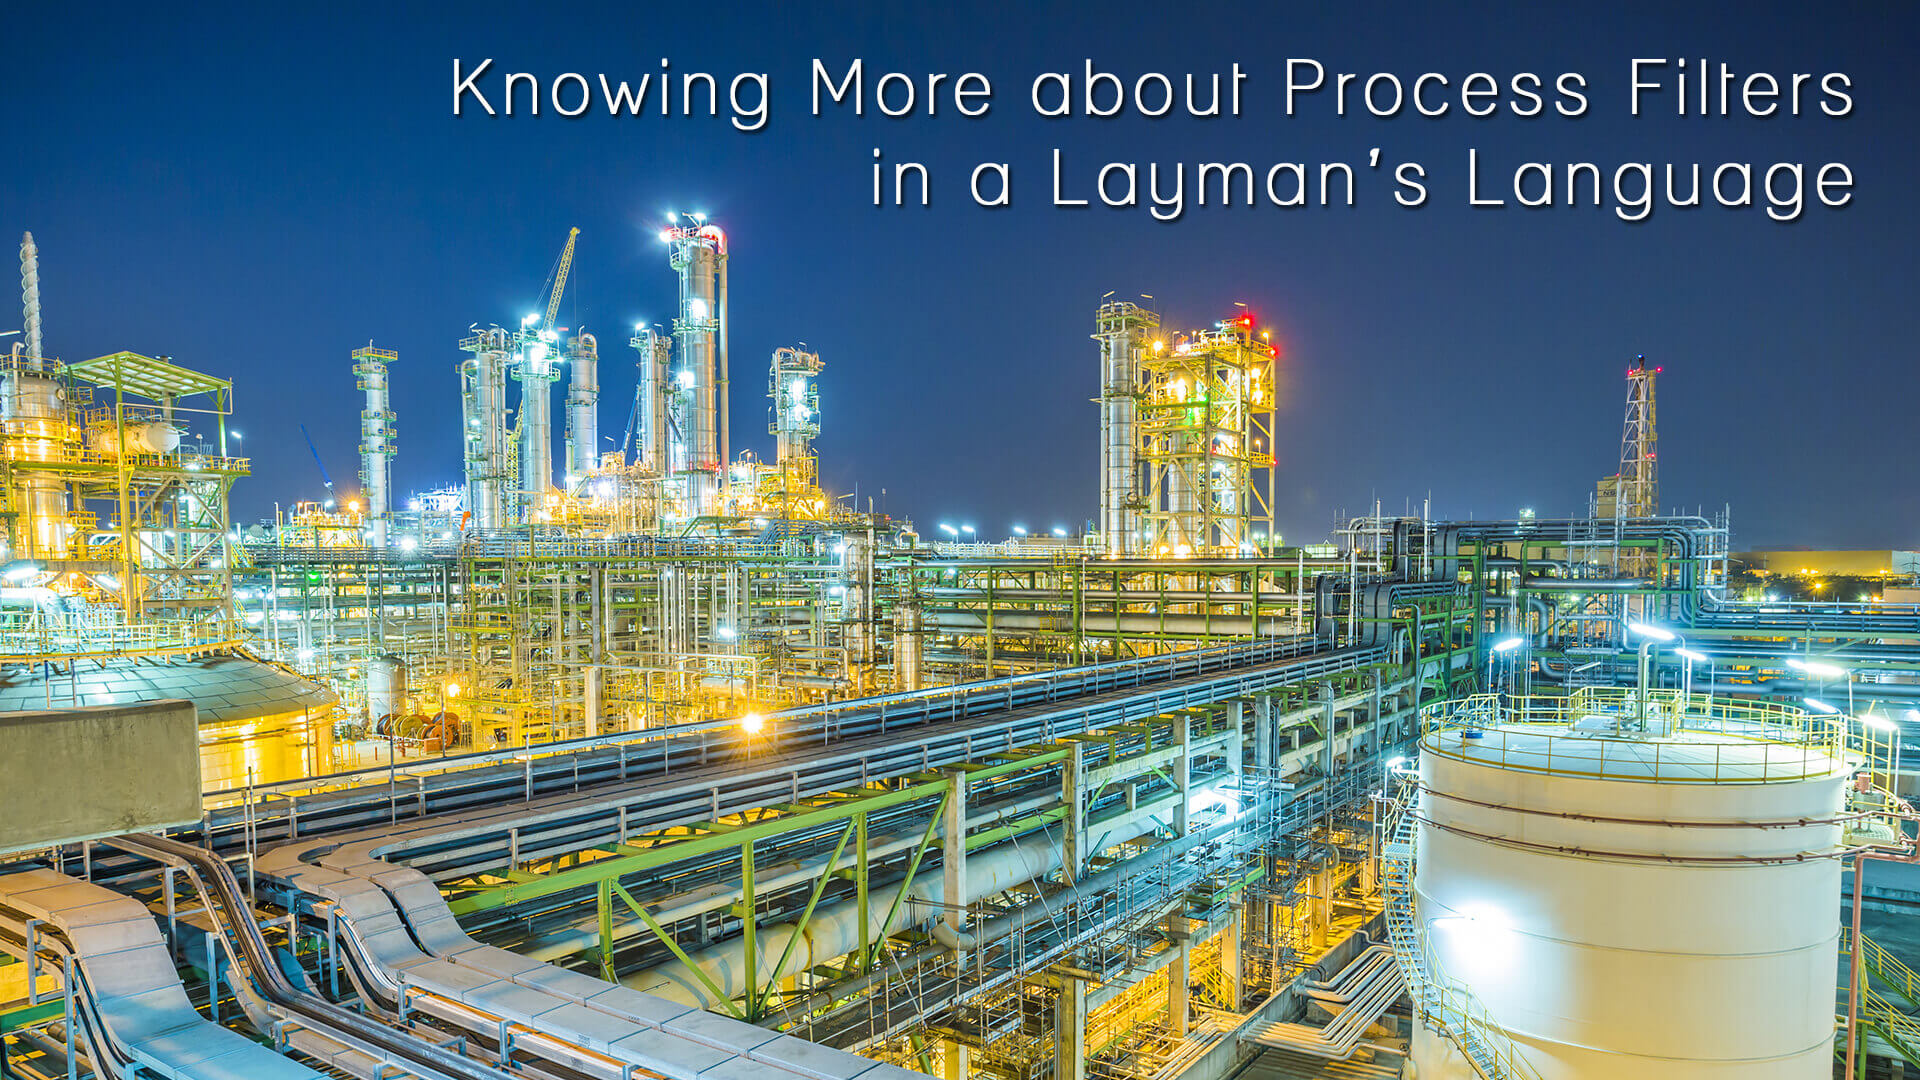 Knowing More about Process Filters in a Lay Man’s Language